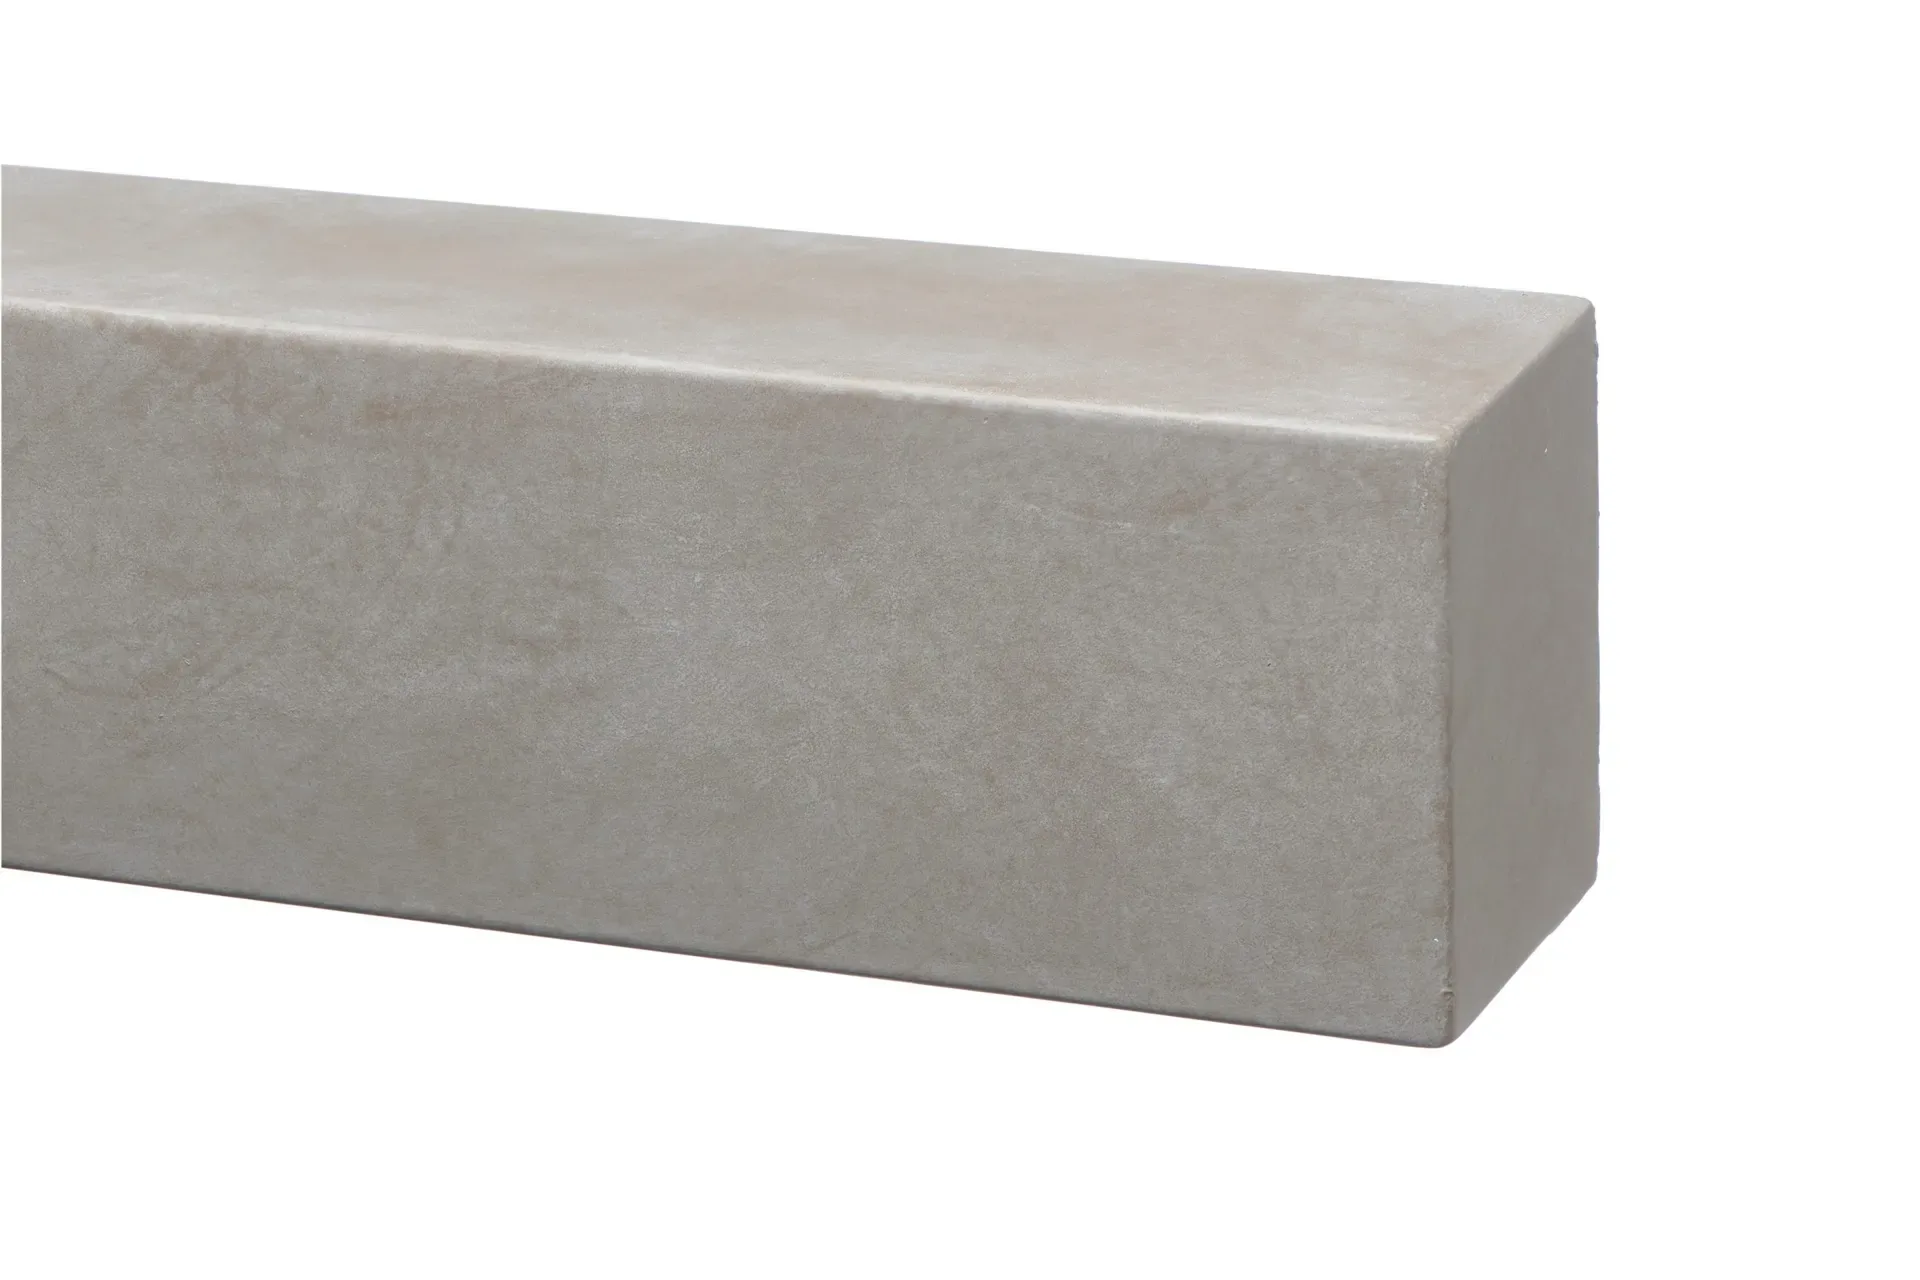 The gallery collection fireplace beam stone